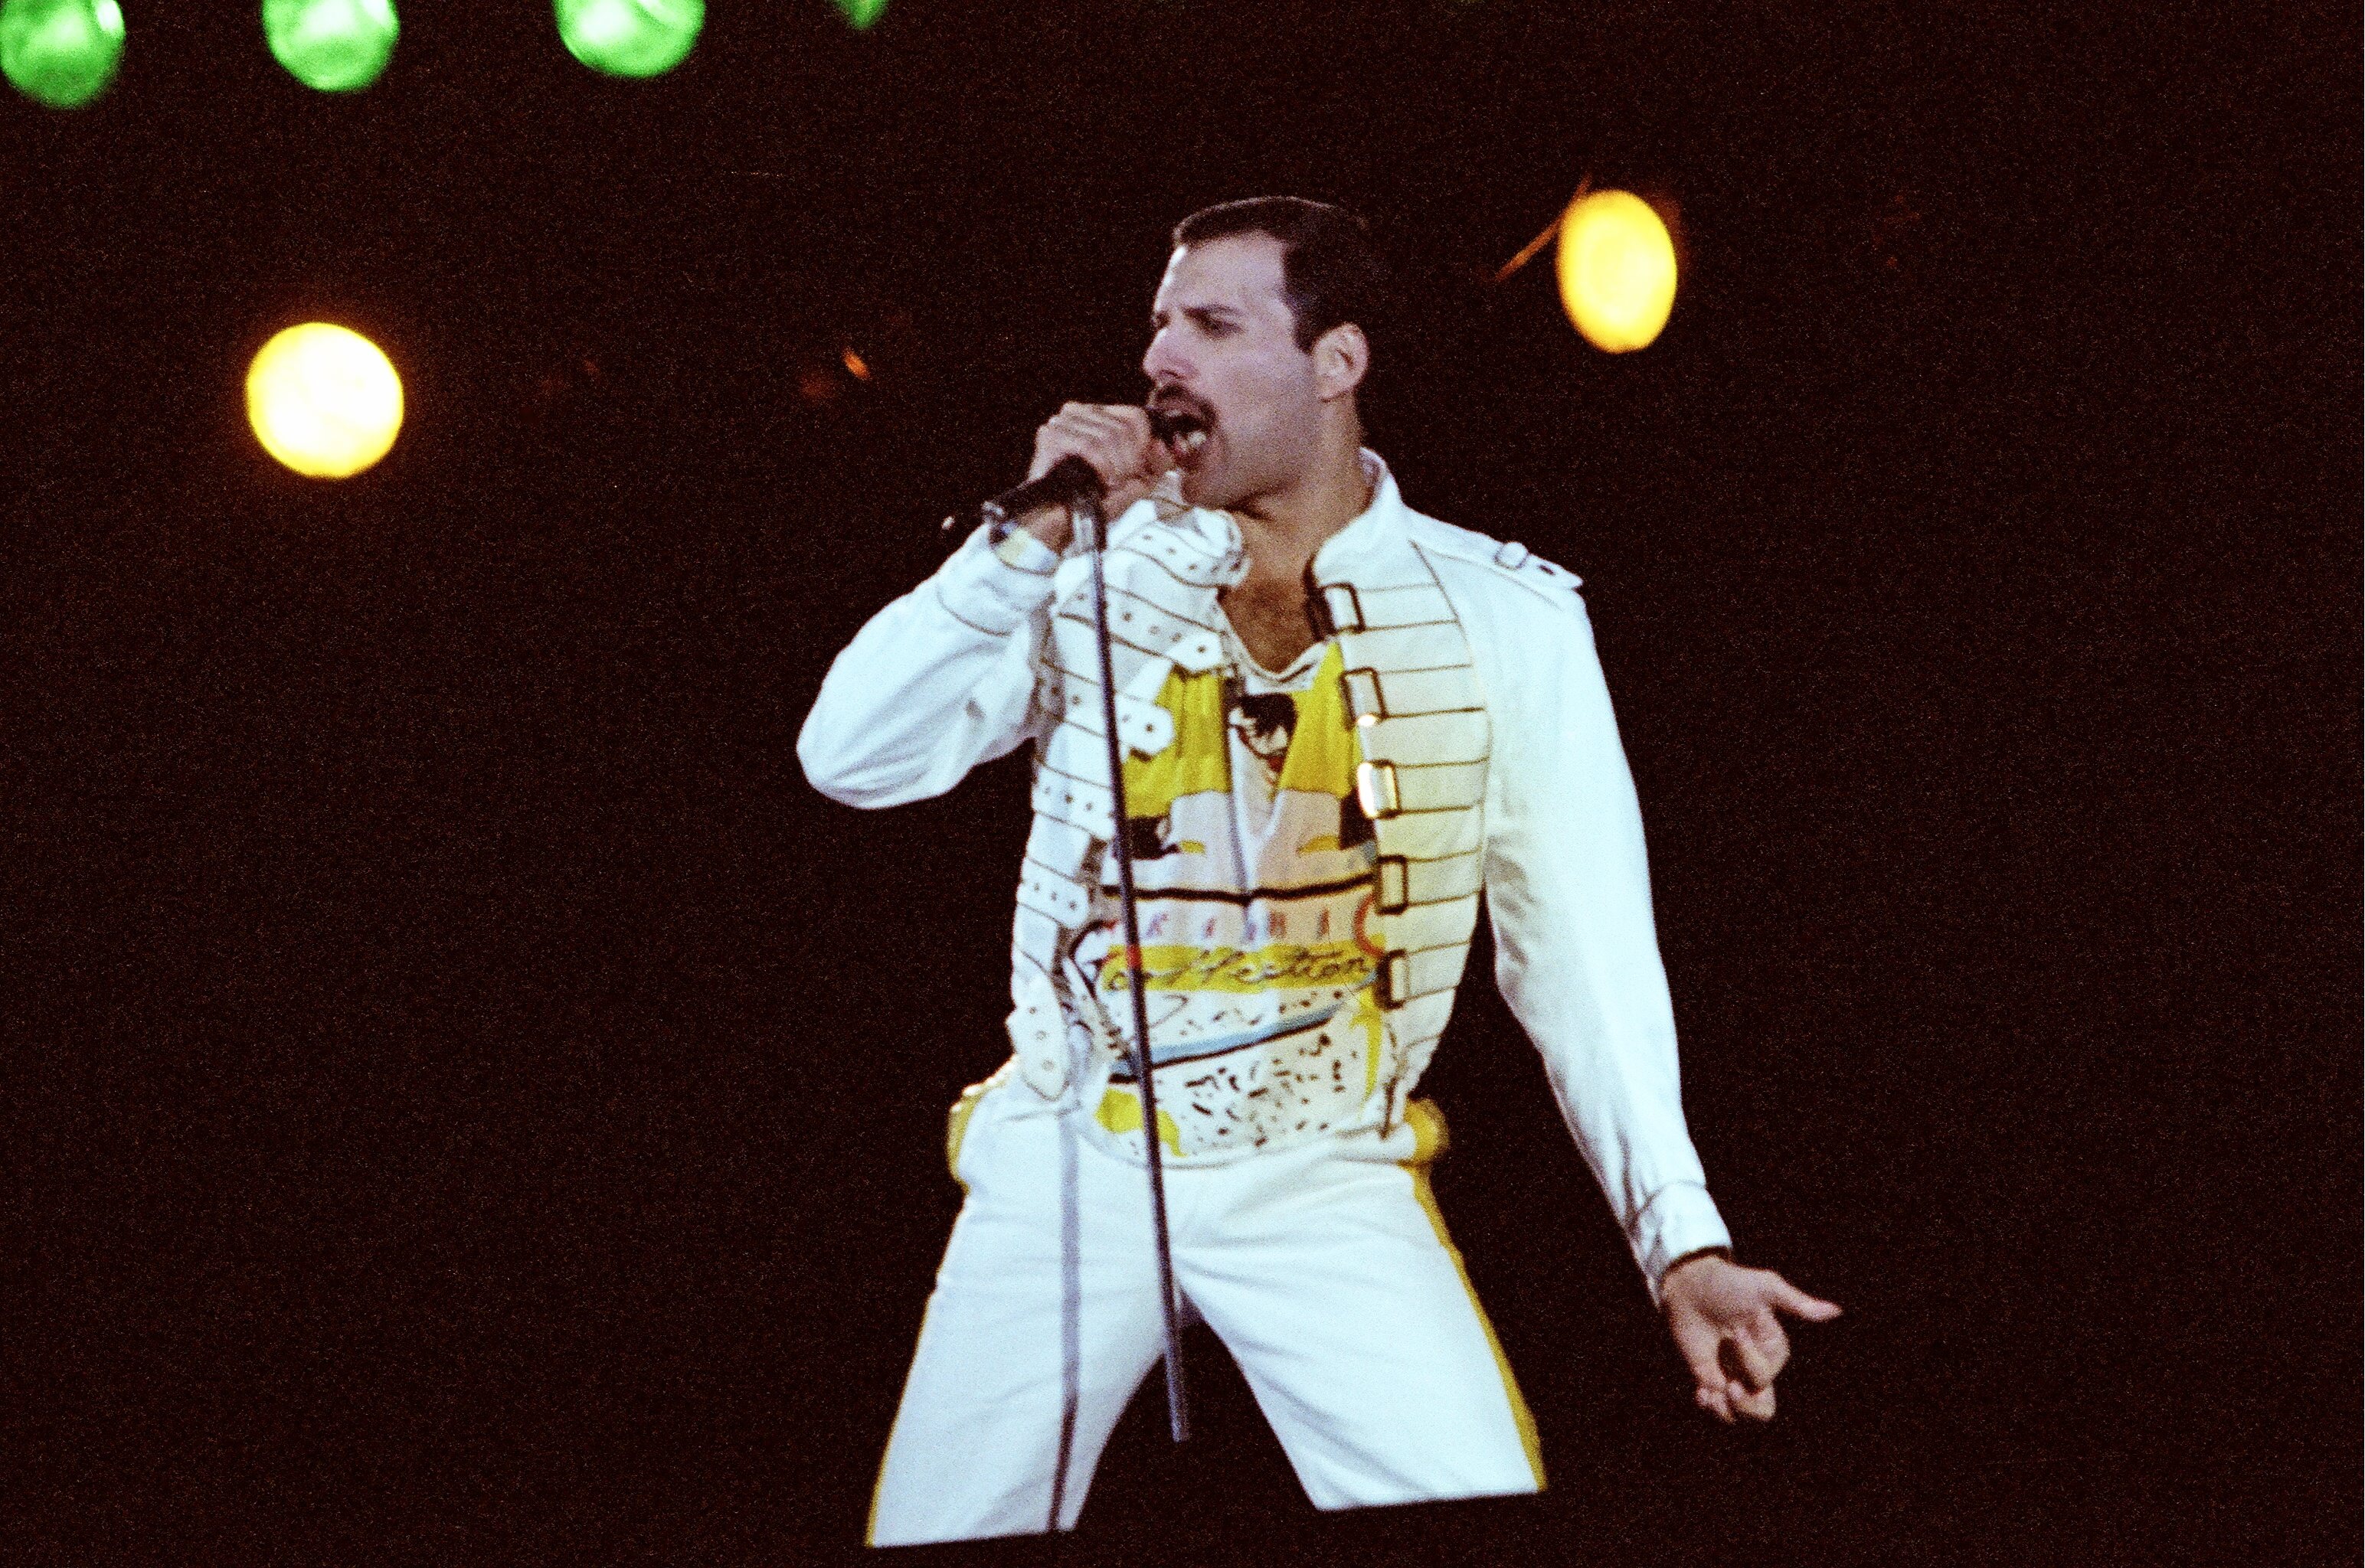 Freddie Mercury, the singer who performed vocals on Queen's Christmas song "Thank God It's Christmas," with a microphone